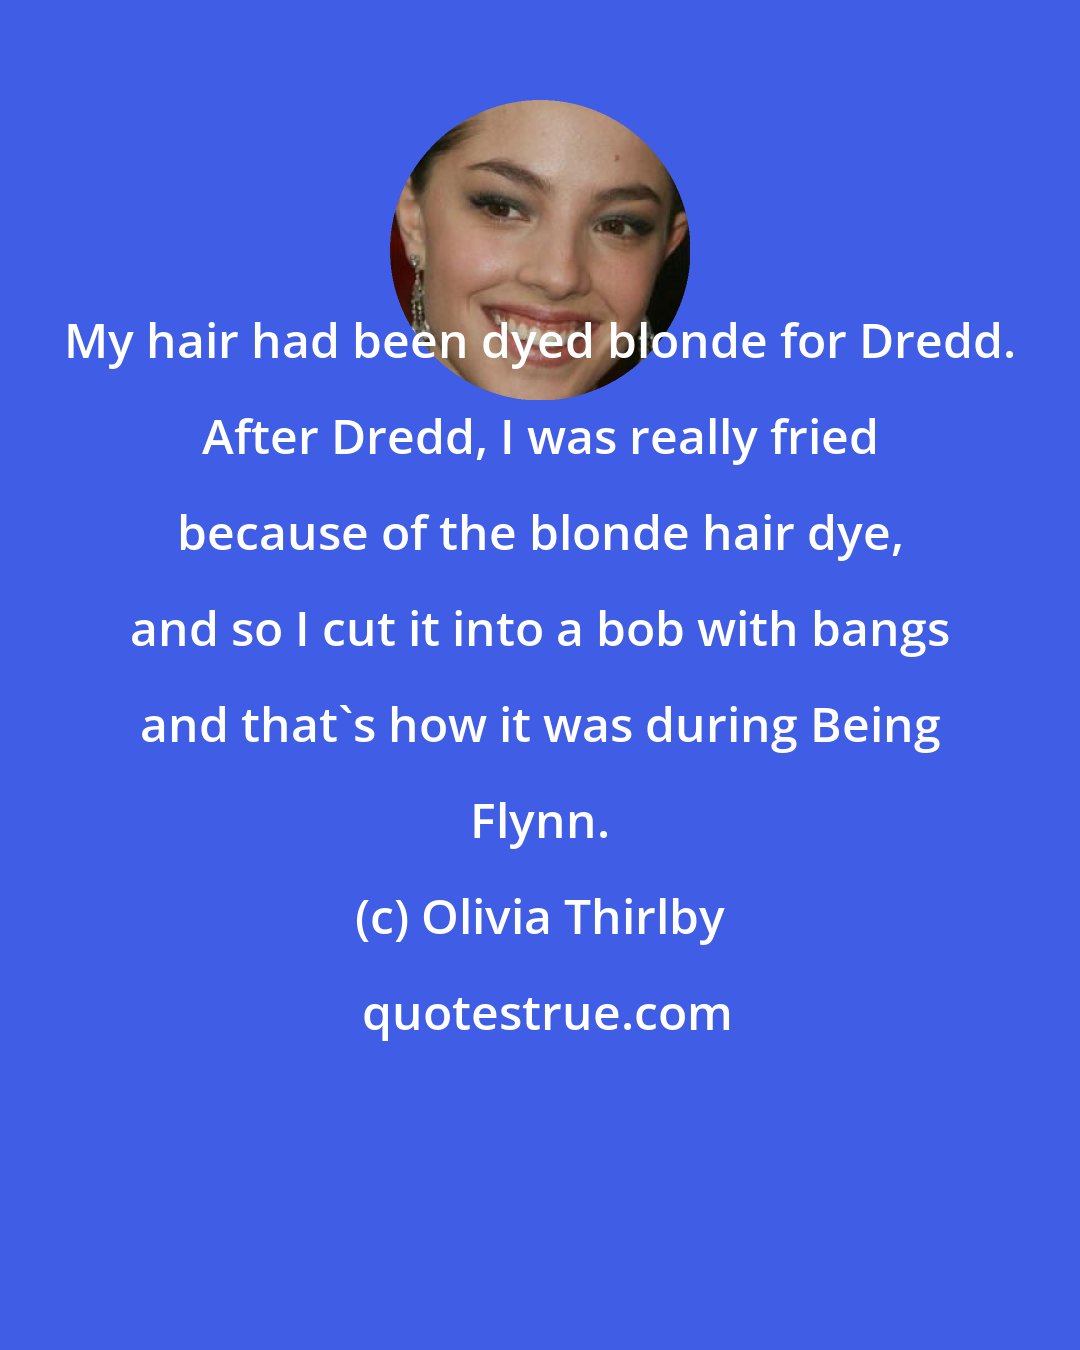 Olivia Thirlby: My hair had been dyed blonde for Dredd. After Dredd, I was really fried because of the blonde hair dye, and so I cut it into a bob with bangs and that's how it was during Being Flynn.